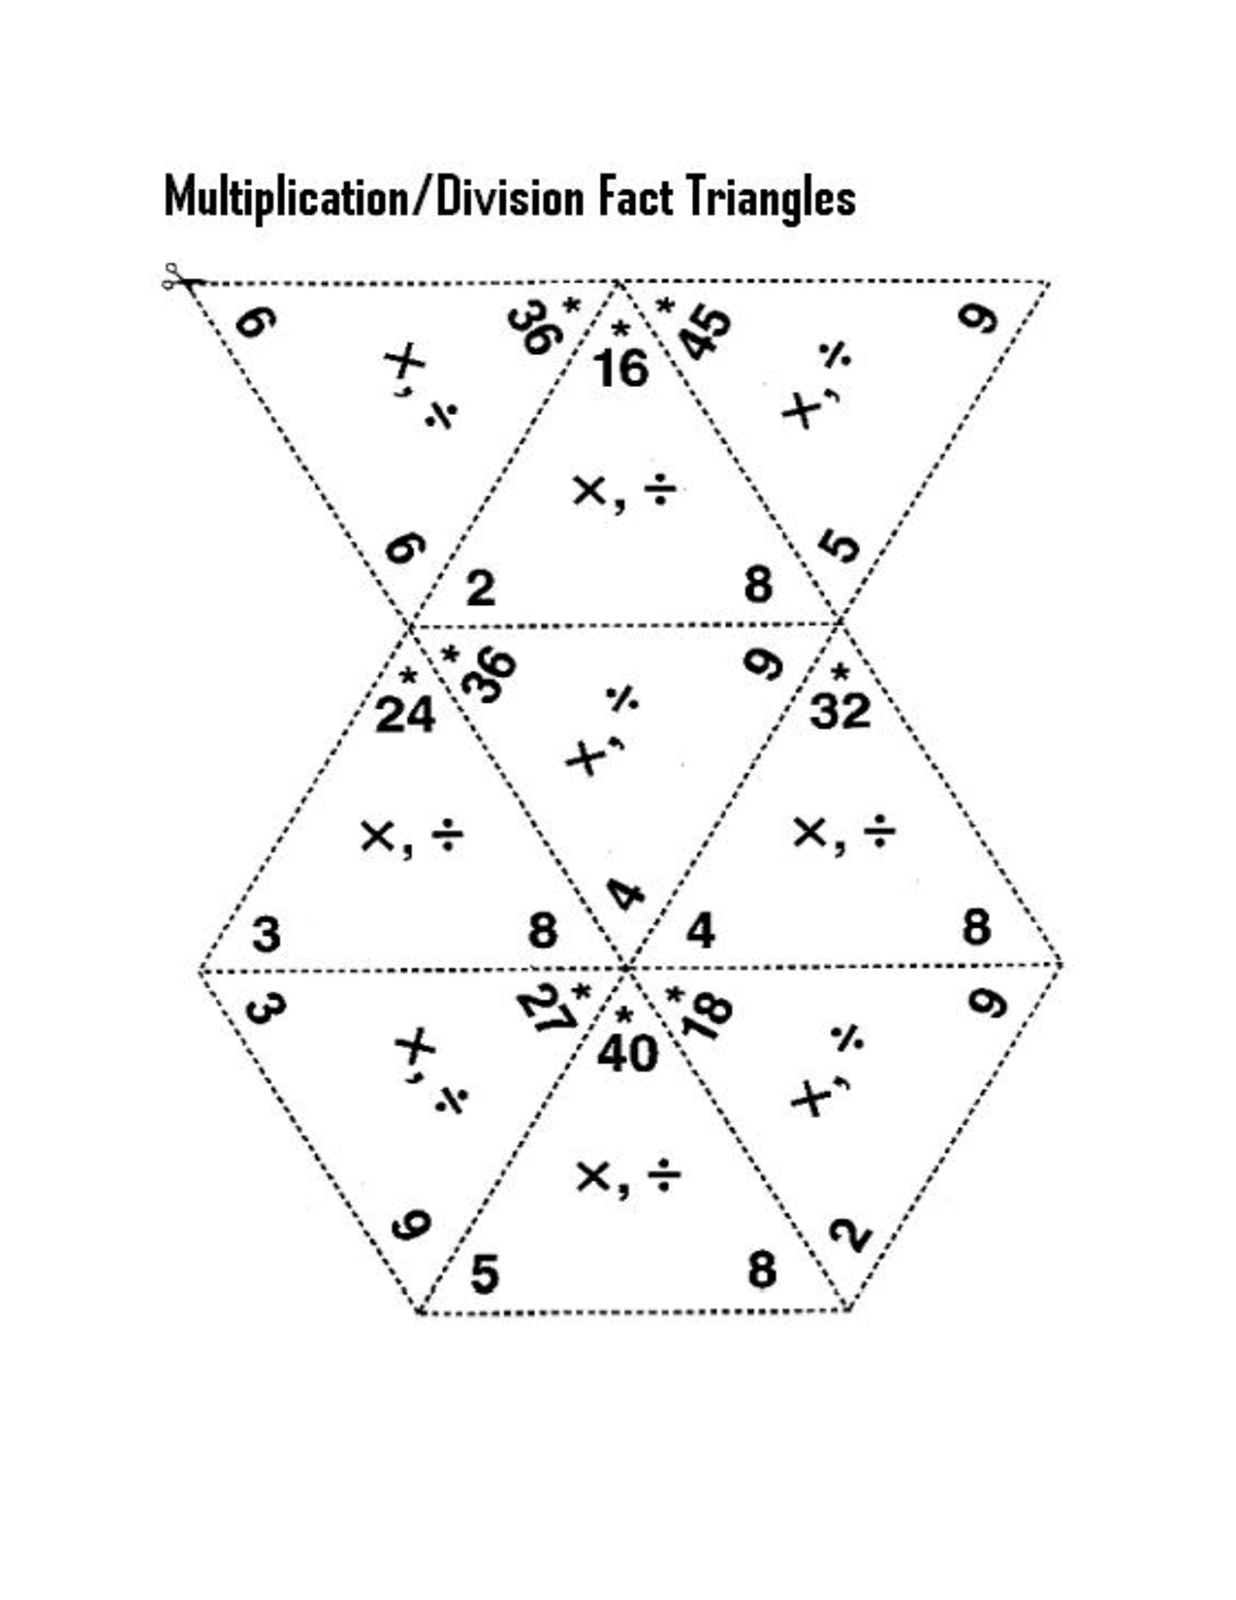 Fact Triangles Worksheet Multiplication And Division within Printable Multiplication Triangles